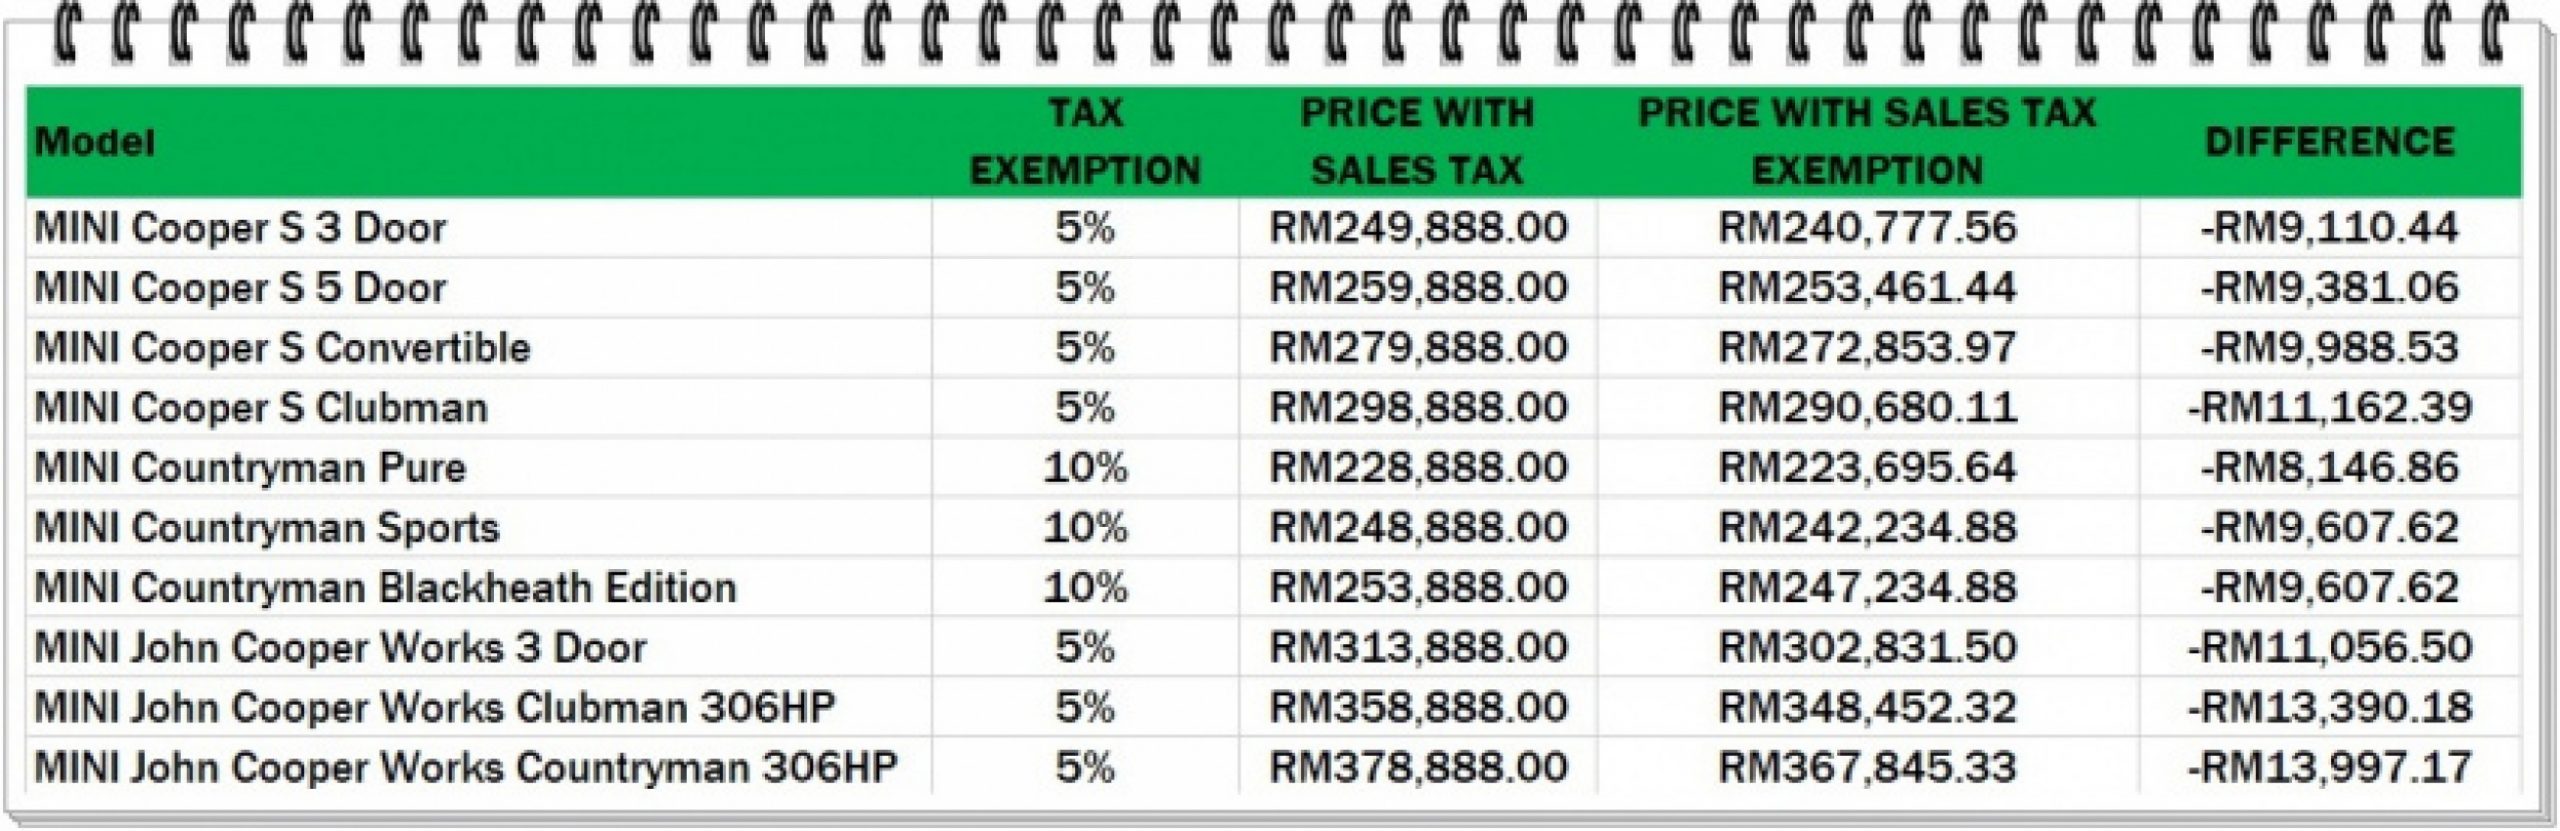 autos, bmw, cars, mini, bmw group malaysia, revised pricelist, revised prices, sales tax exemption, mini and bmw prices with sales tax exemption